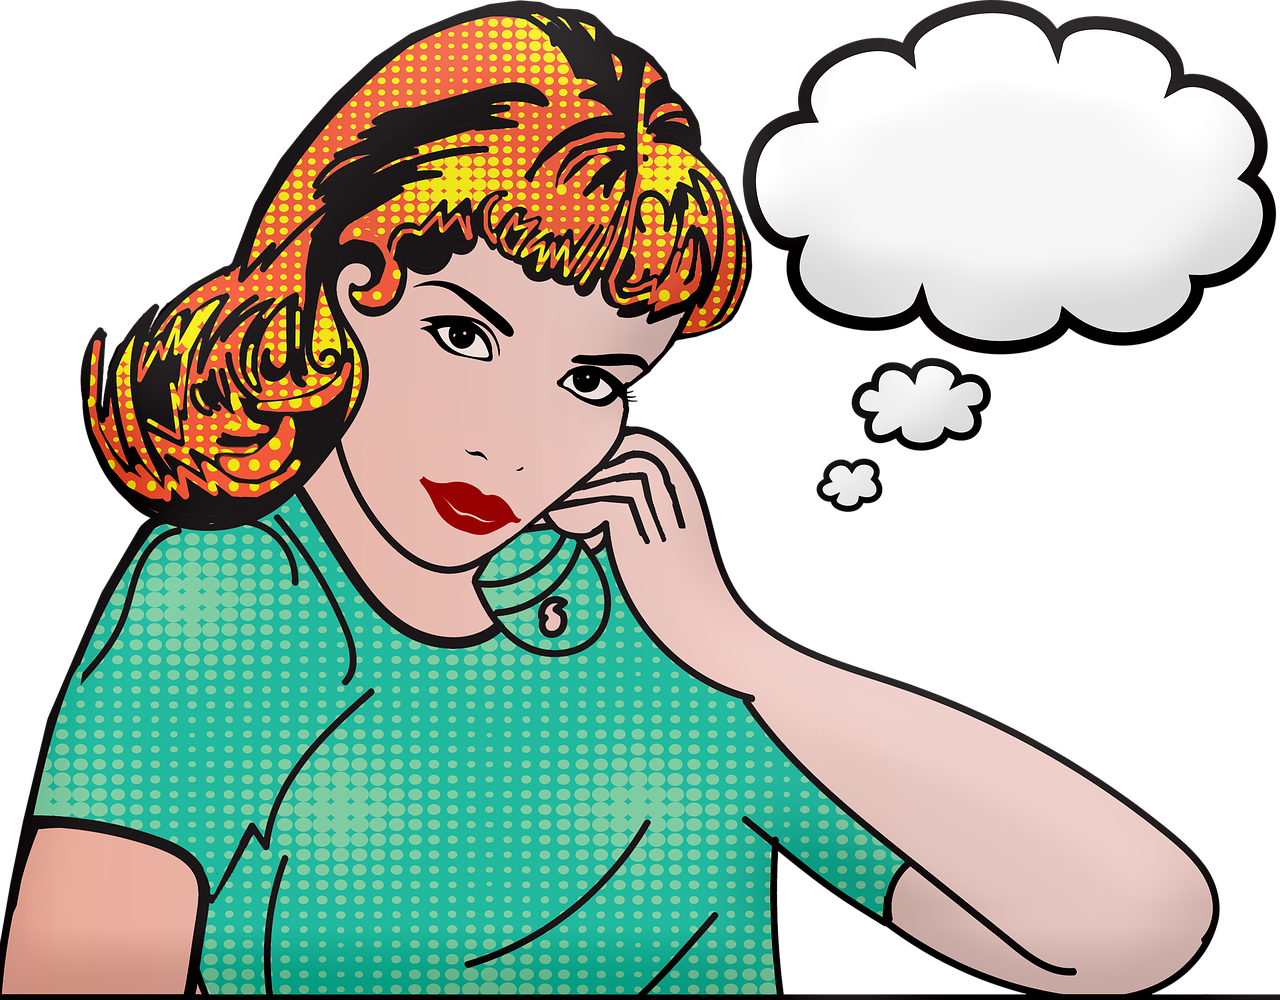 a woman talking on a cell phone with a thought bubble above her head, shutterstock, pop art, 50s style infomercial, woman very tired, medium close up shot, stock photo